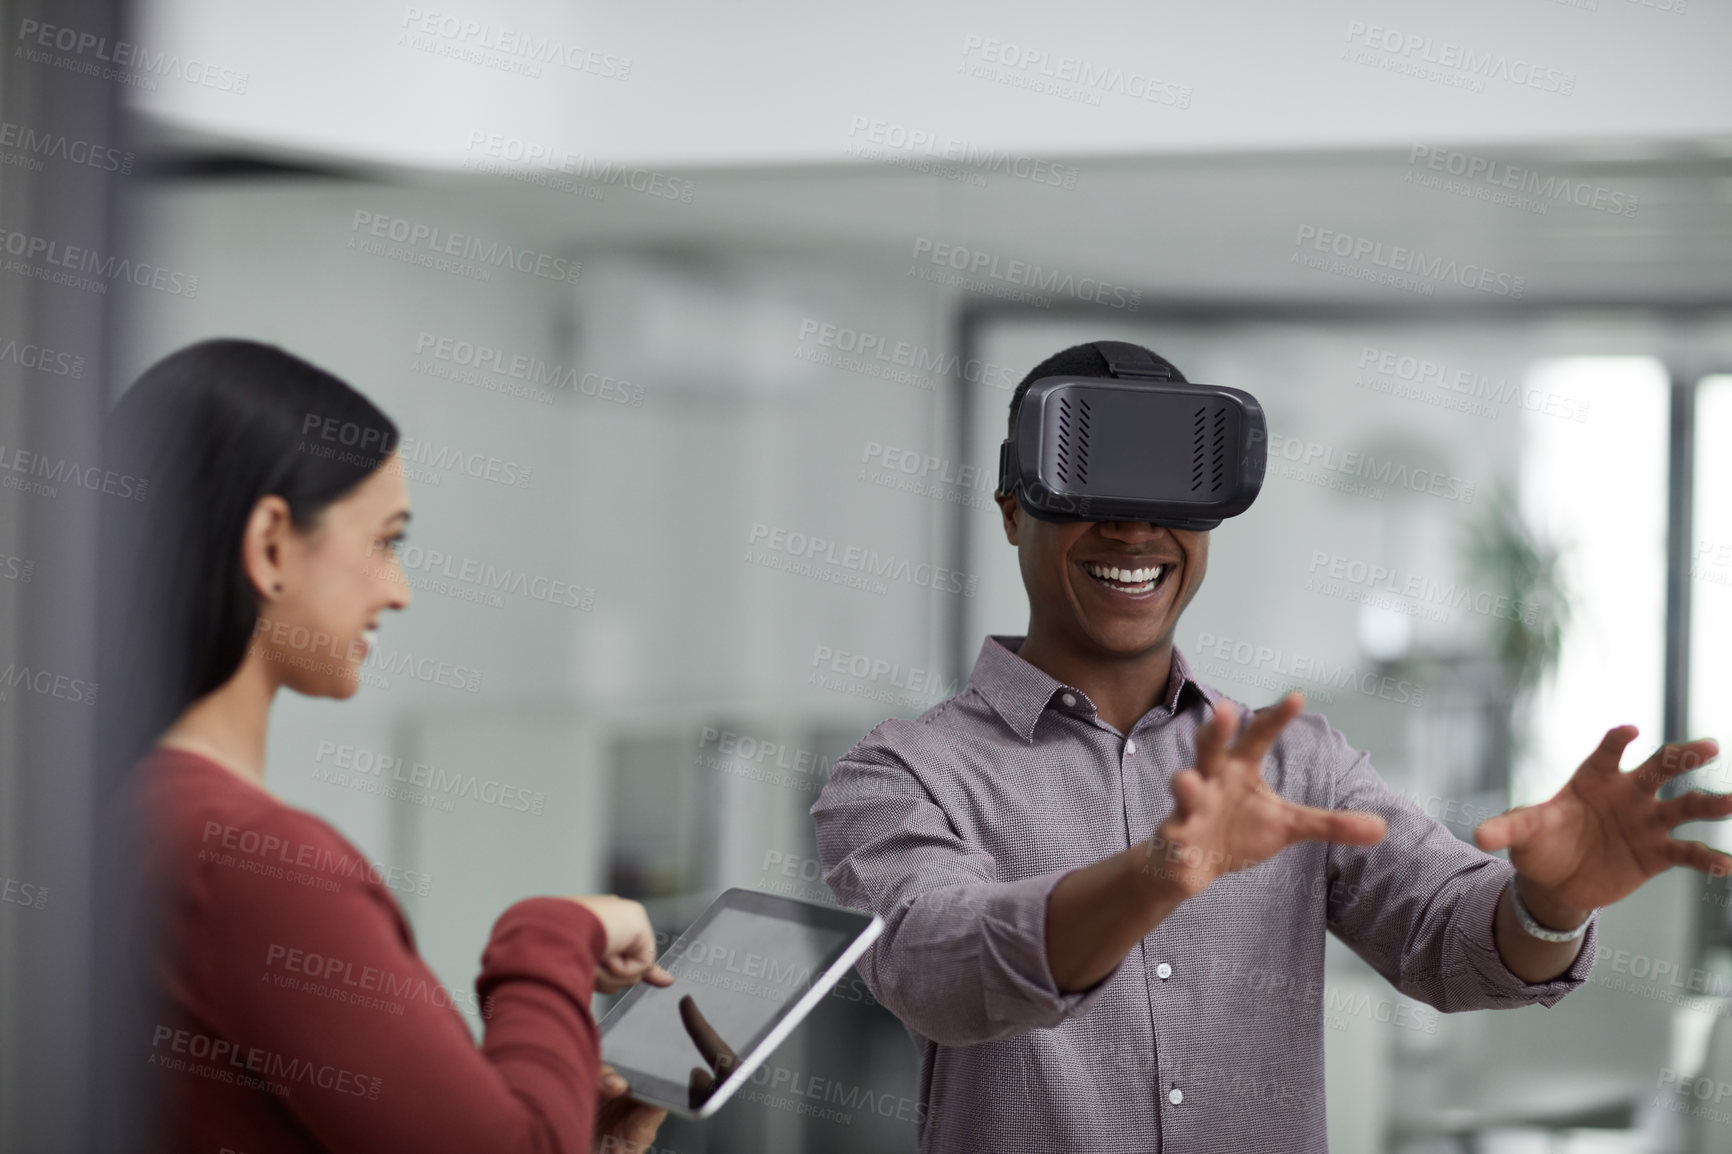 Buy stock photo Shot of two young colleagues using a digital tablet and a virtual reality headset in a modern office